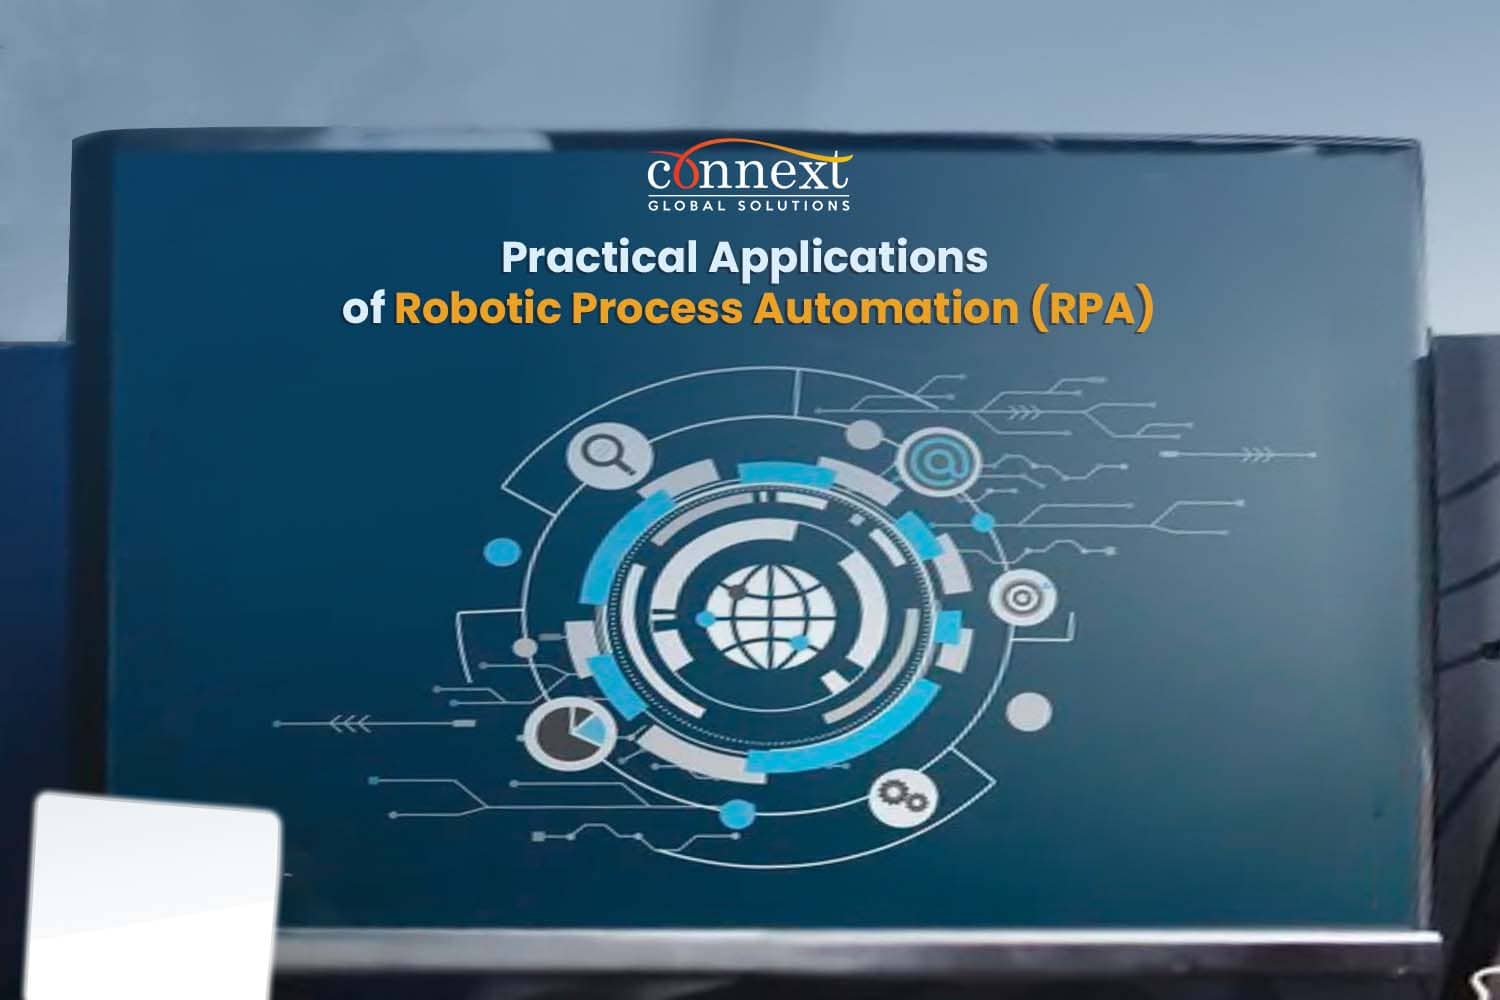 Practical Applications of Robotic Process Automation (RPA)